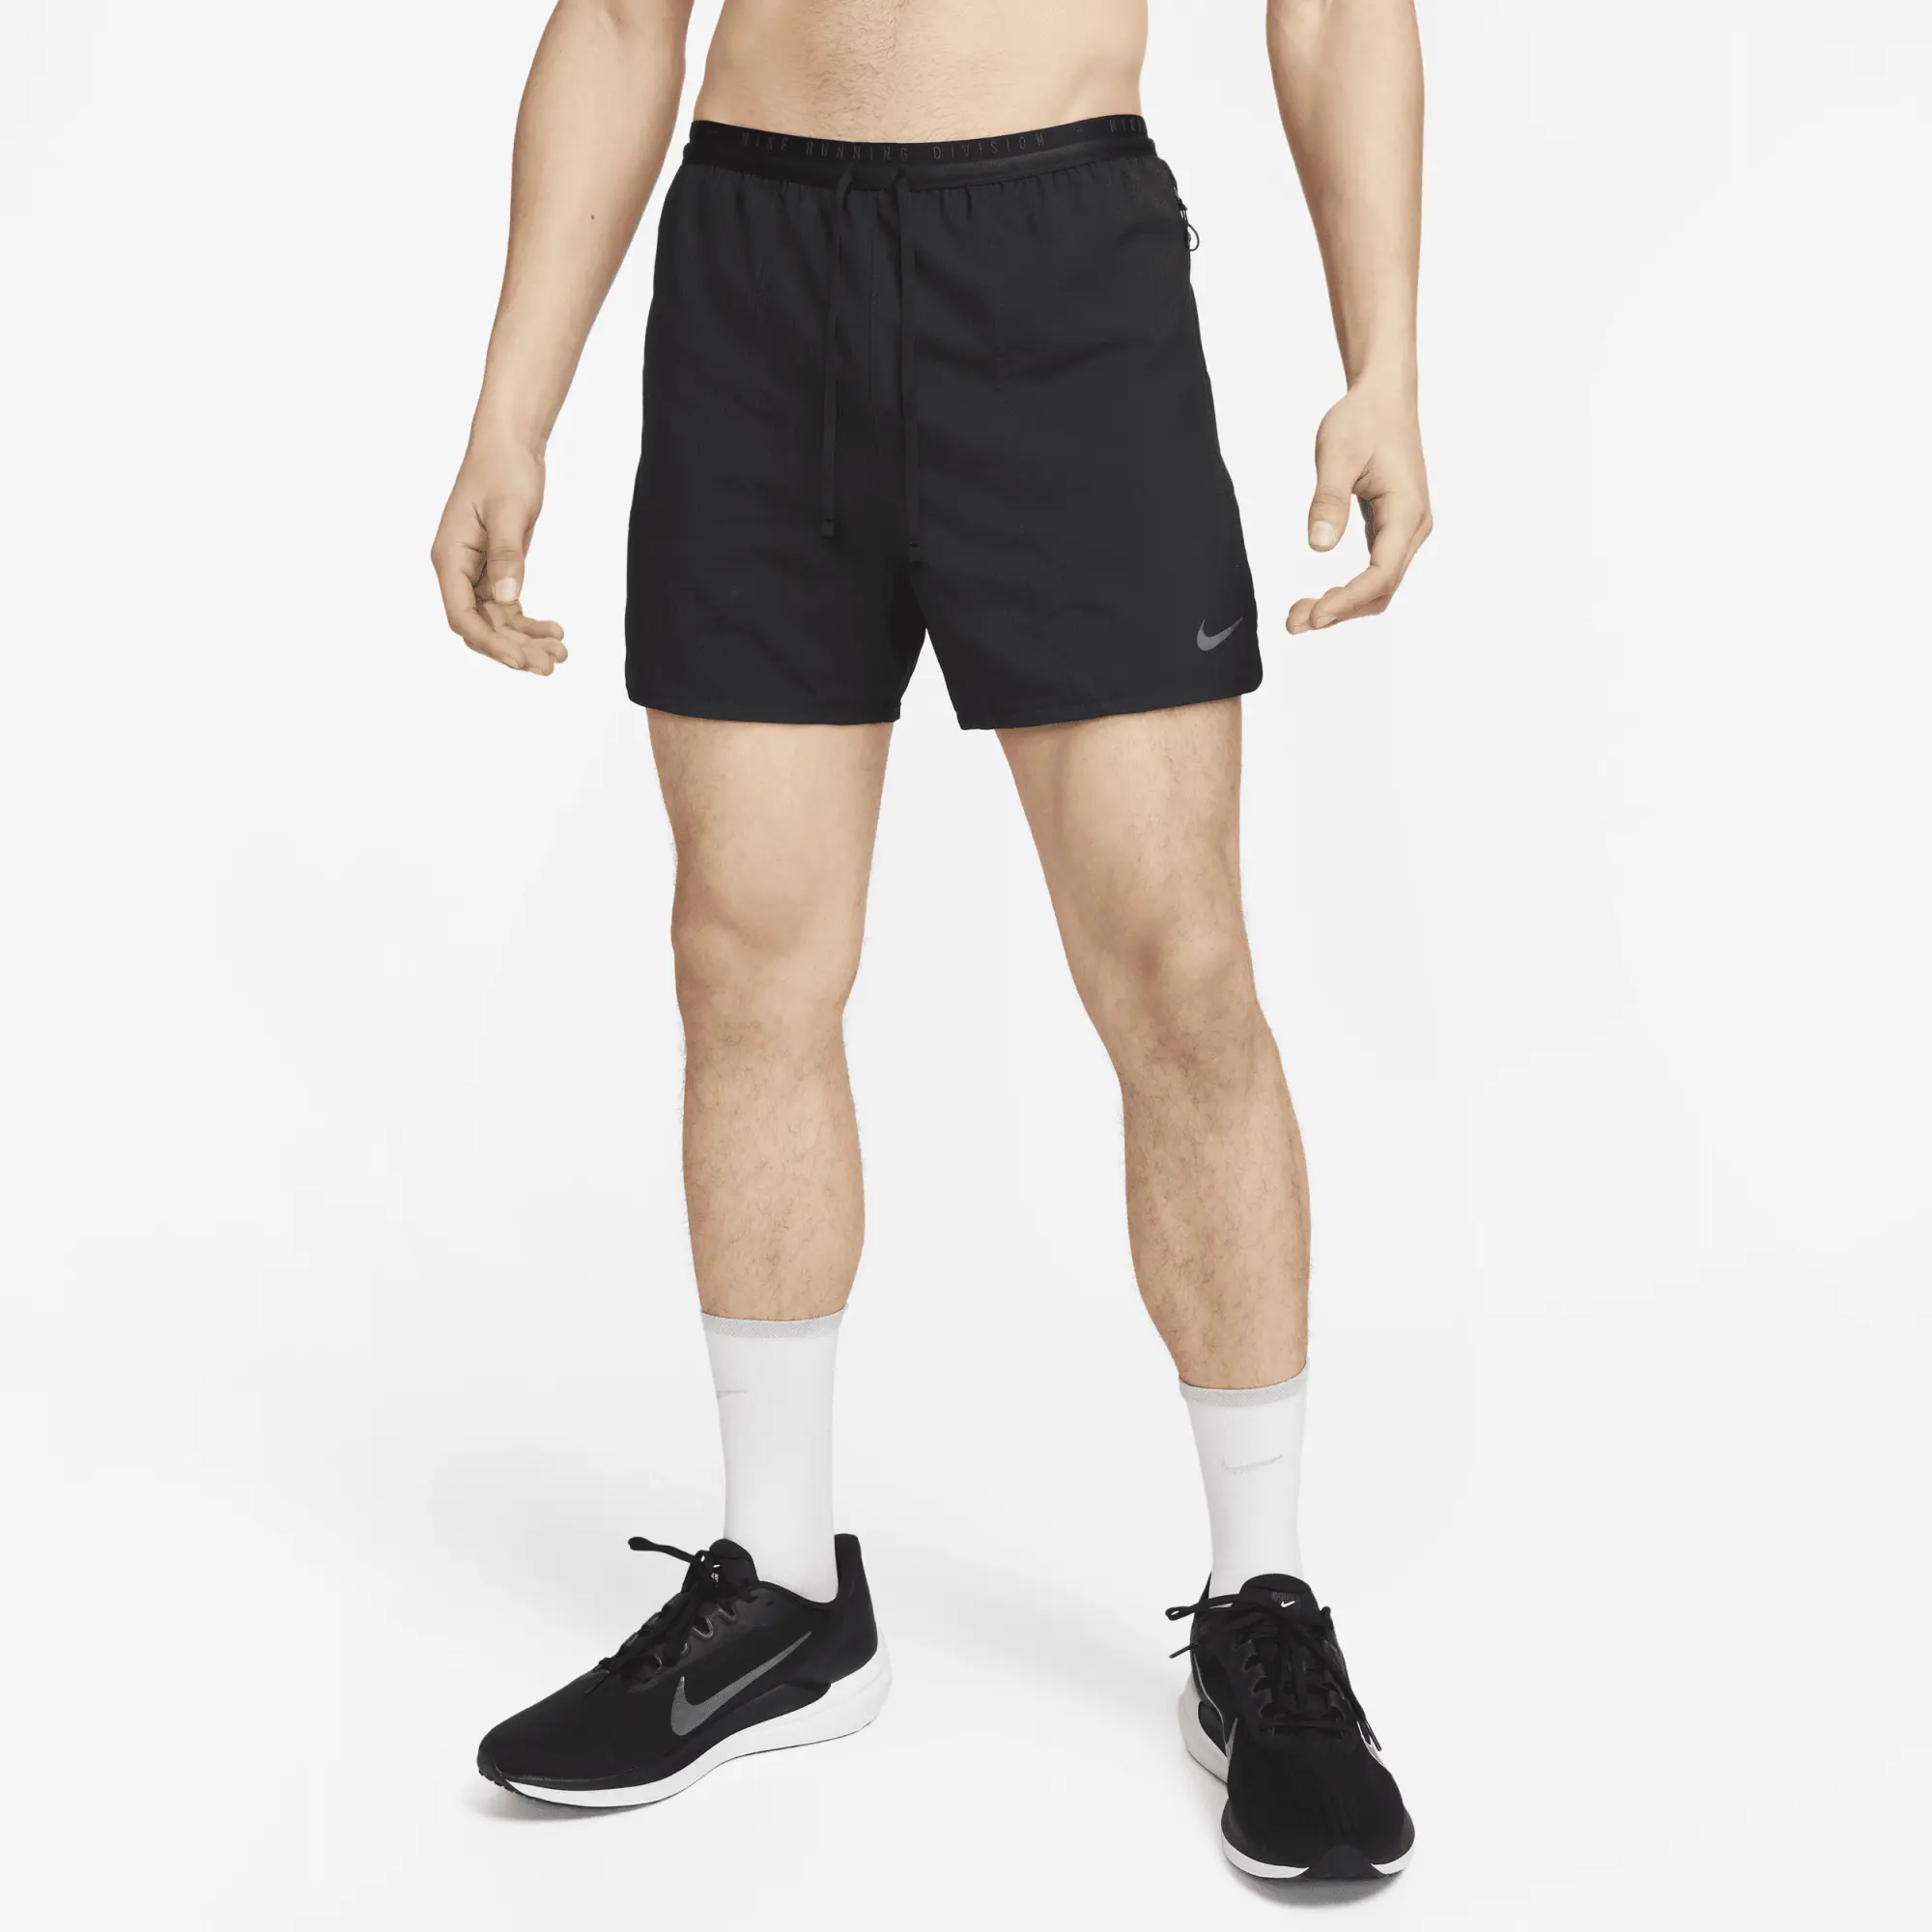 Nike Dri-FIT ADV Run Division Men's 10cm (approx.) Brief-Lined Running Shorts - Black